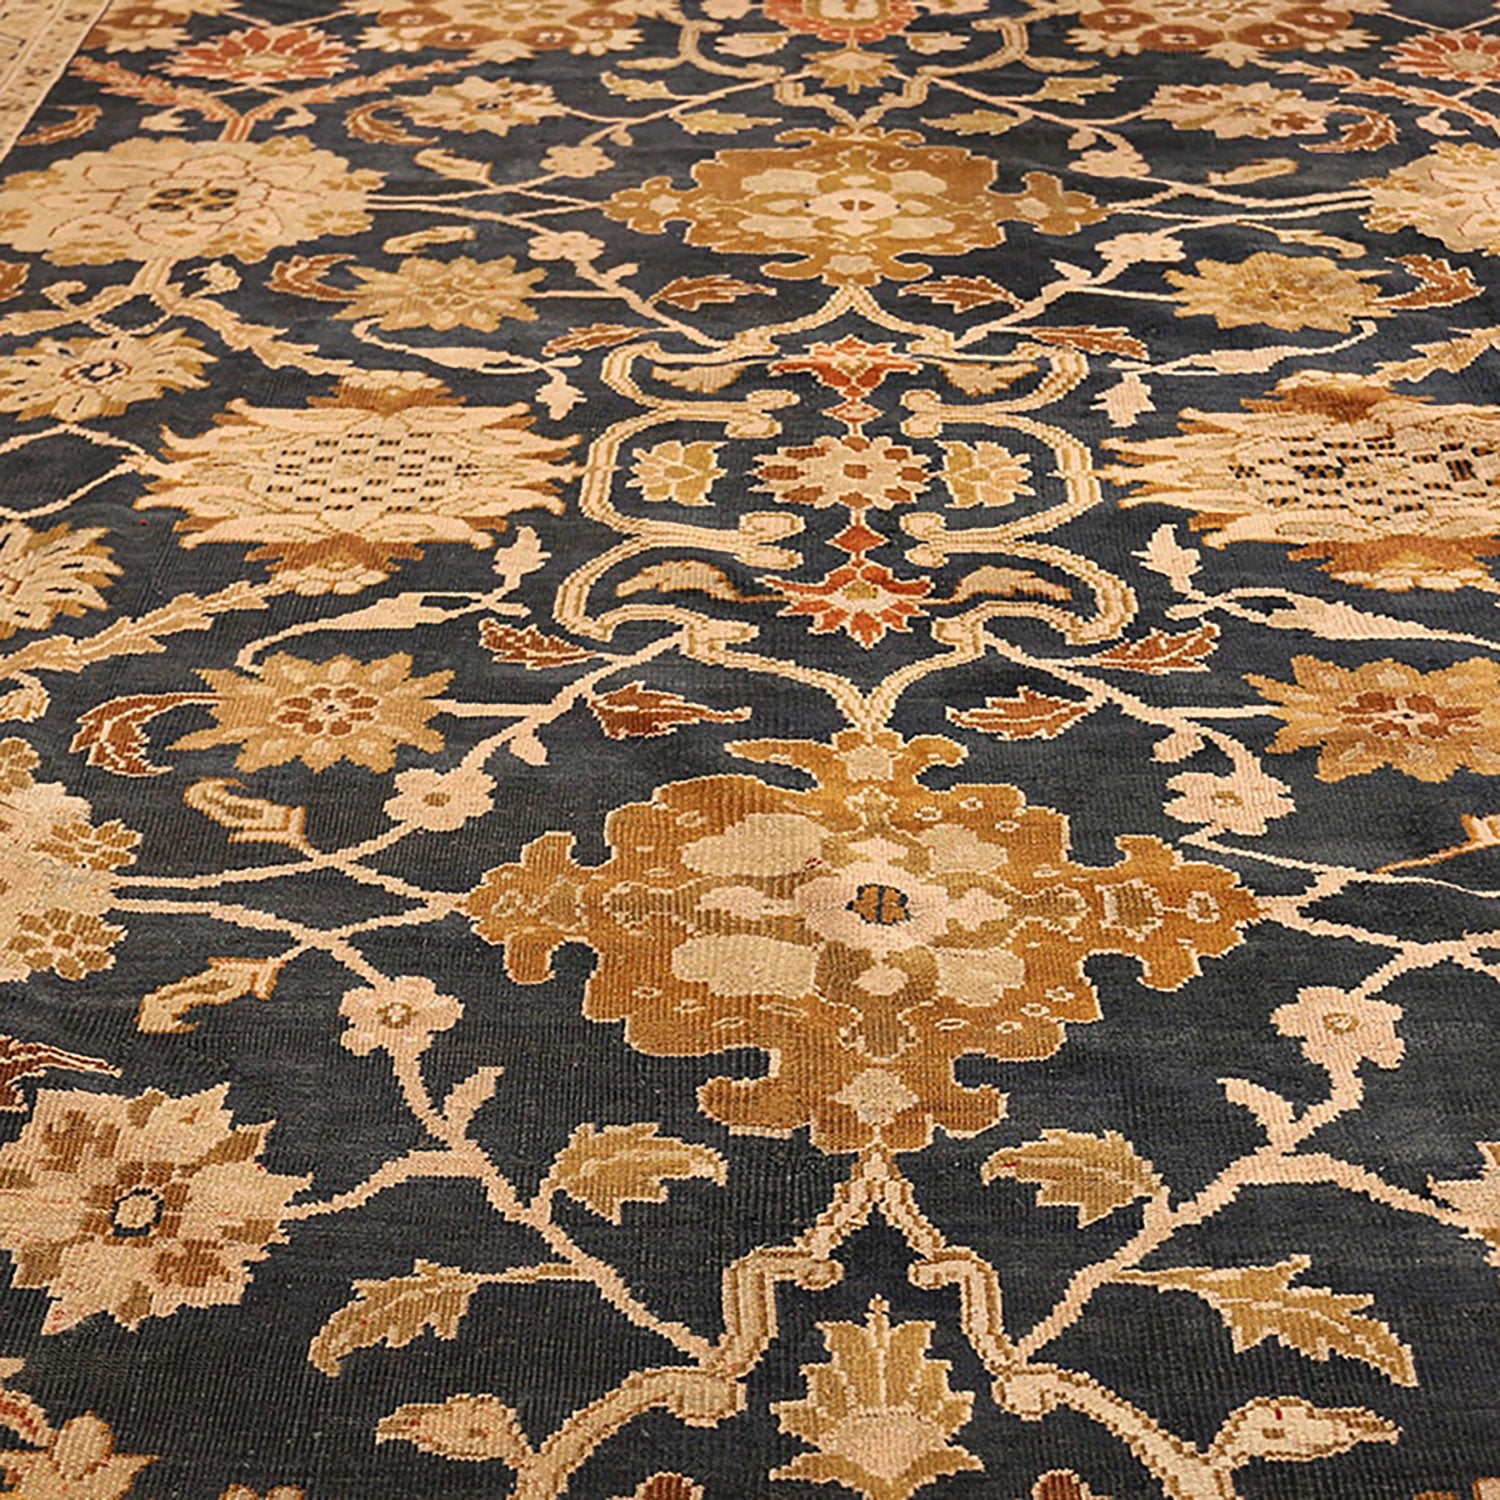 Exquisite Oriental-inspired carpet with intricate floral motifs and warm tones.